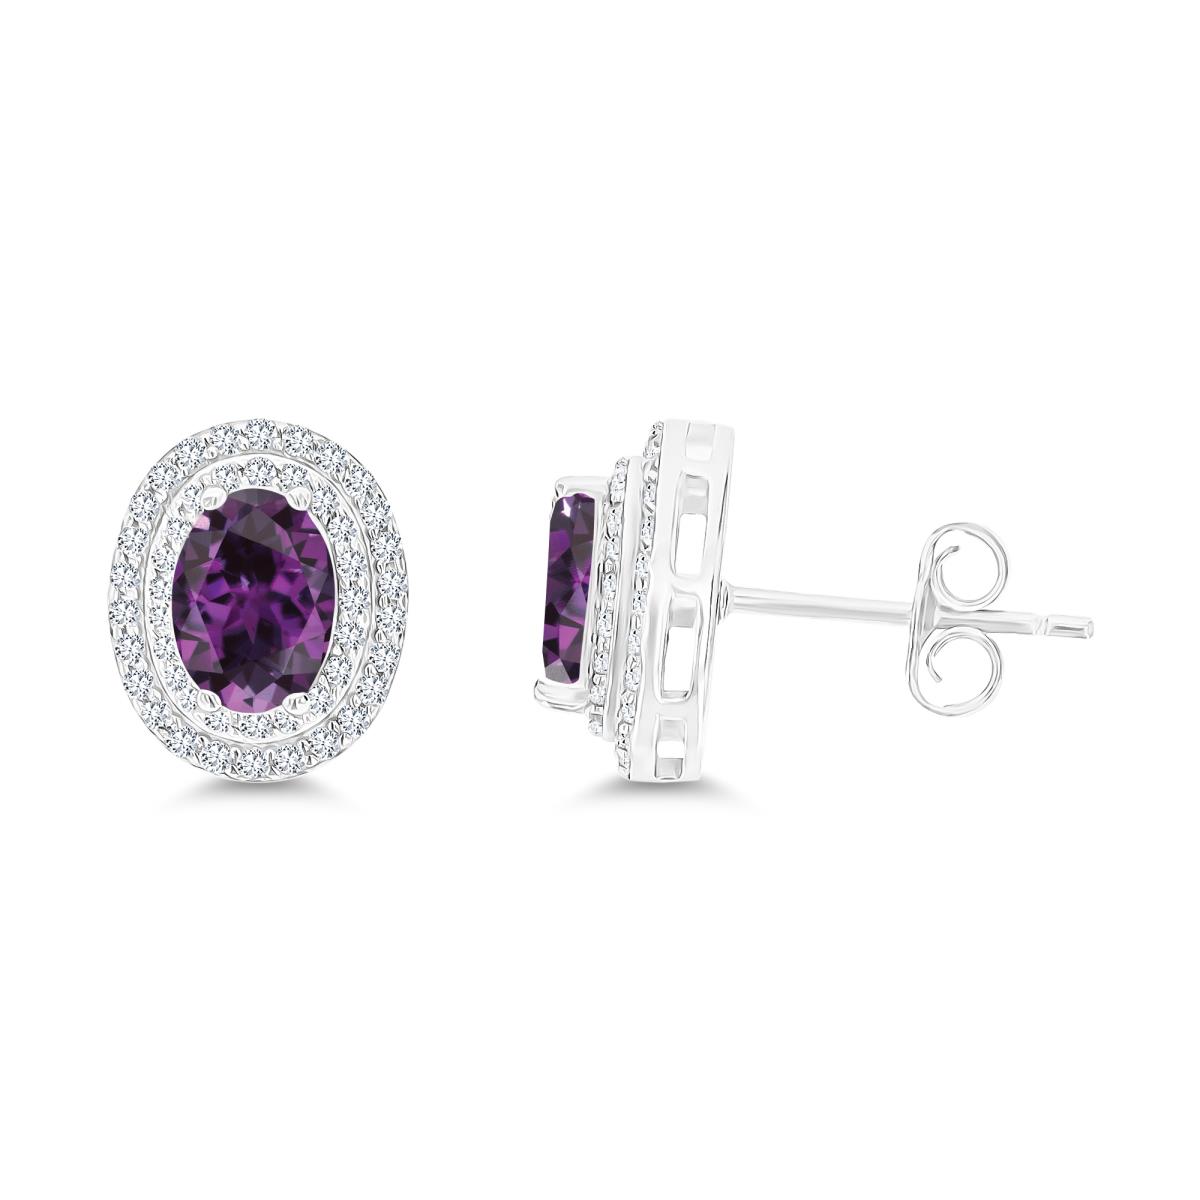 Sterling Silver Rhodium 7x5mm Oval Cr Alexandrite & Cr White Sapphire Halo Earrings